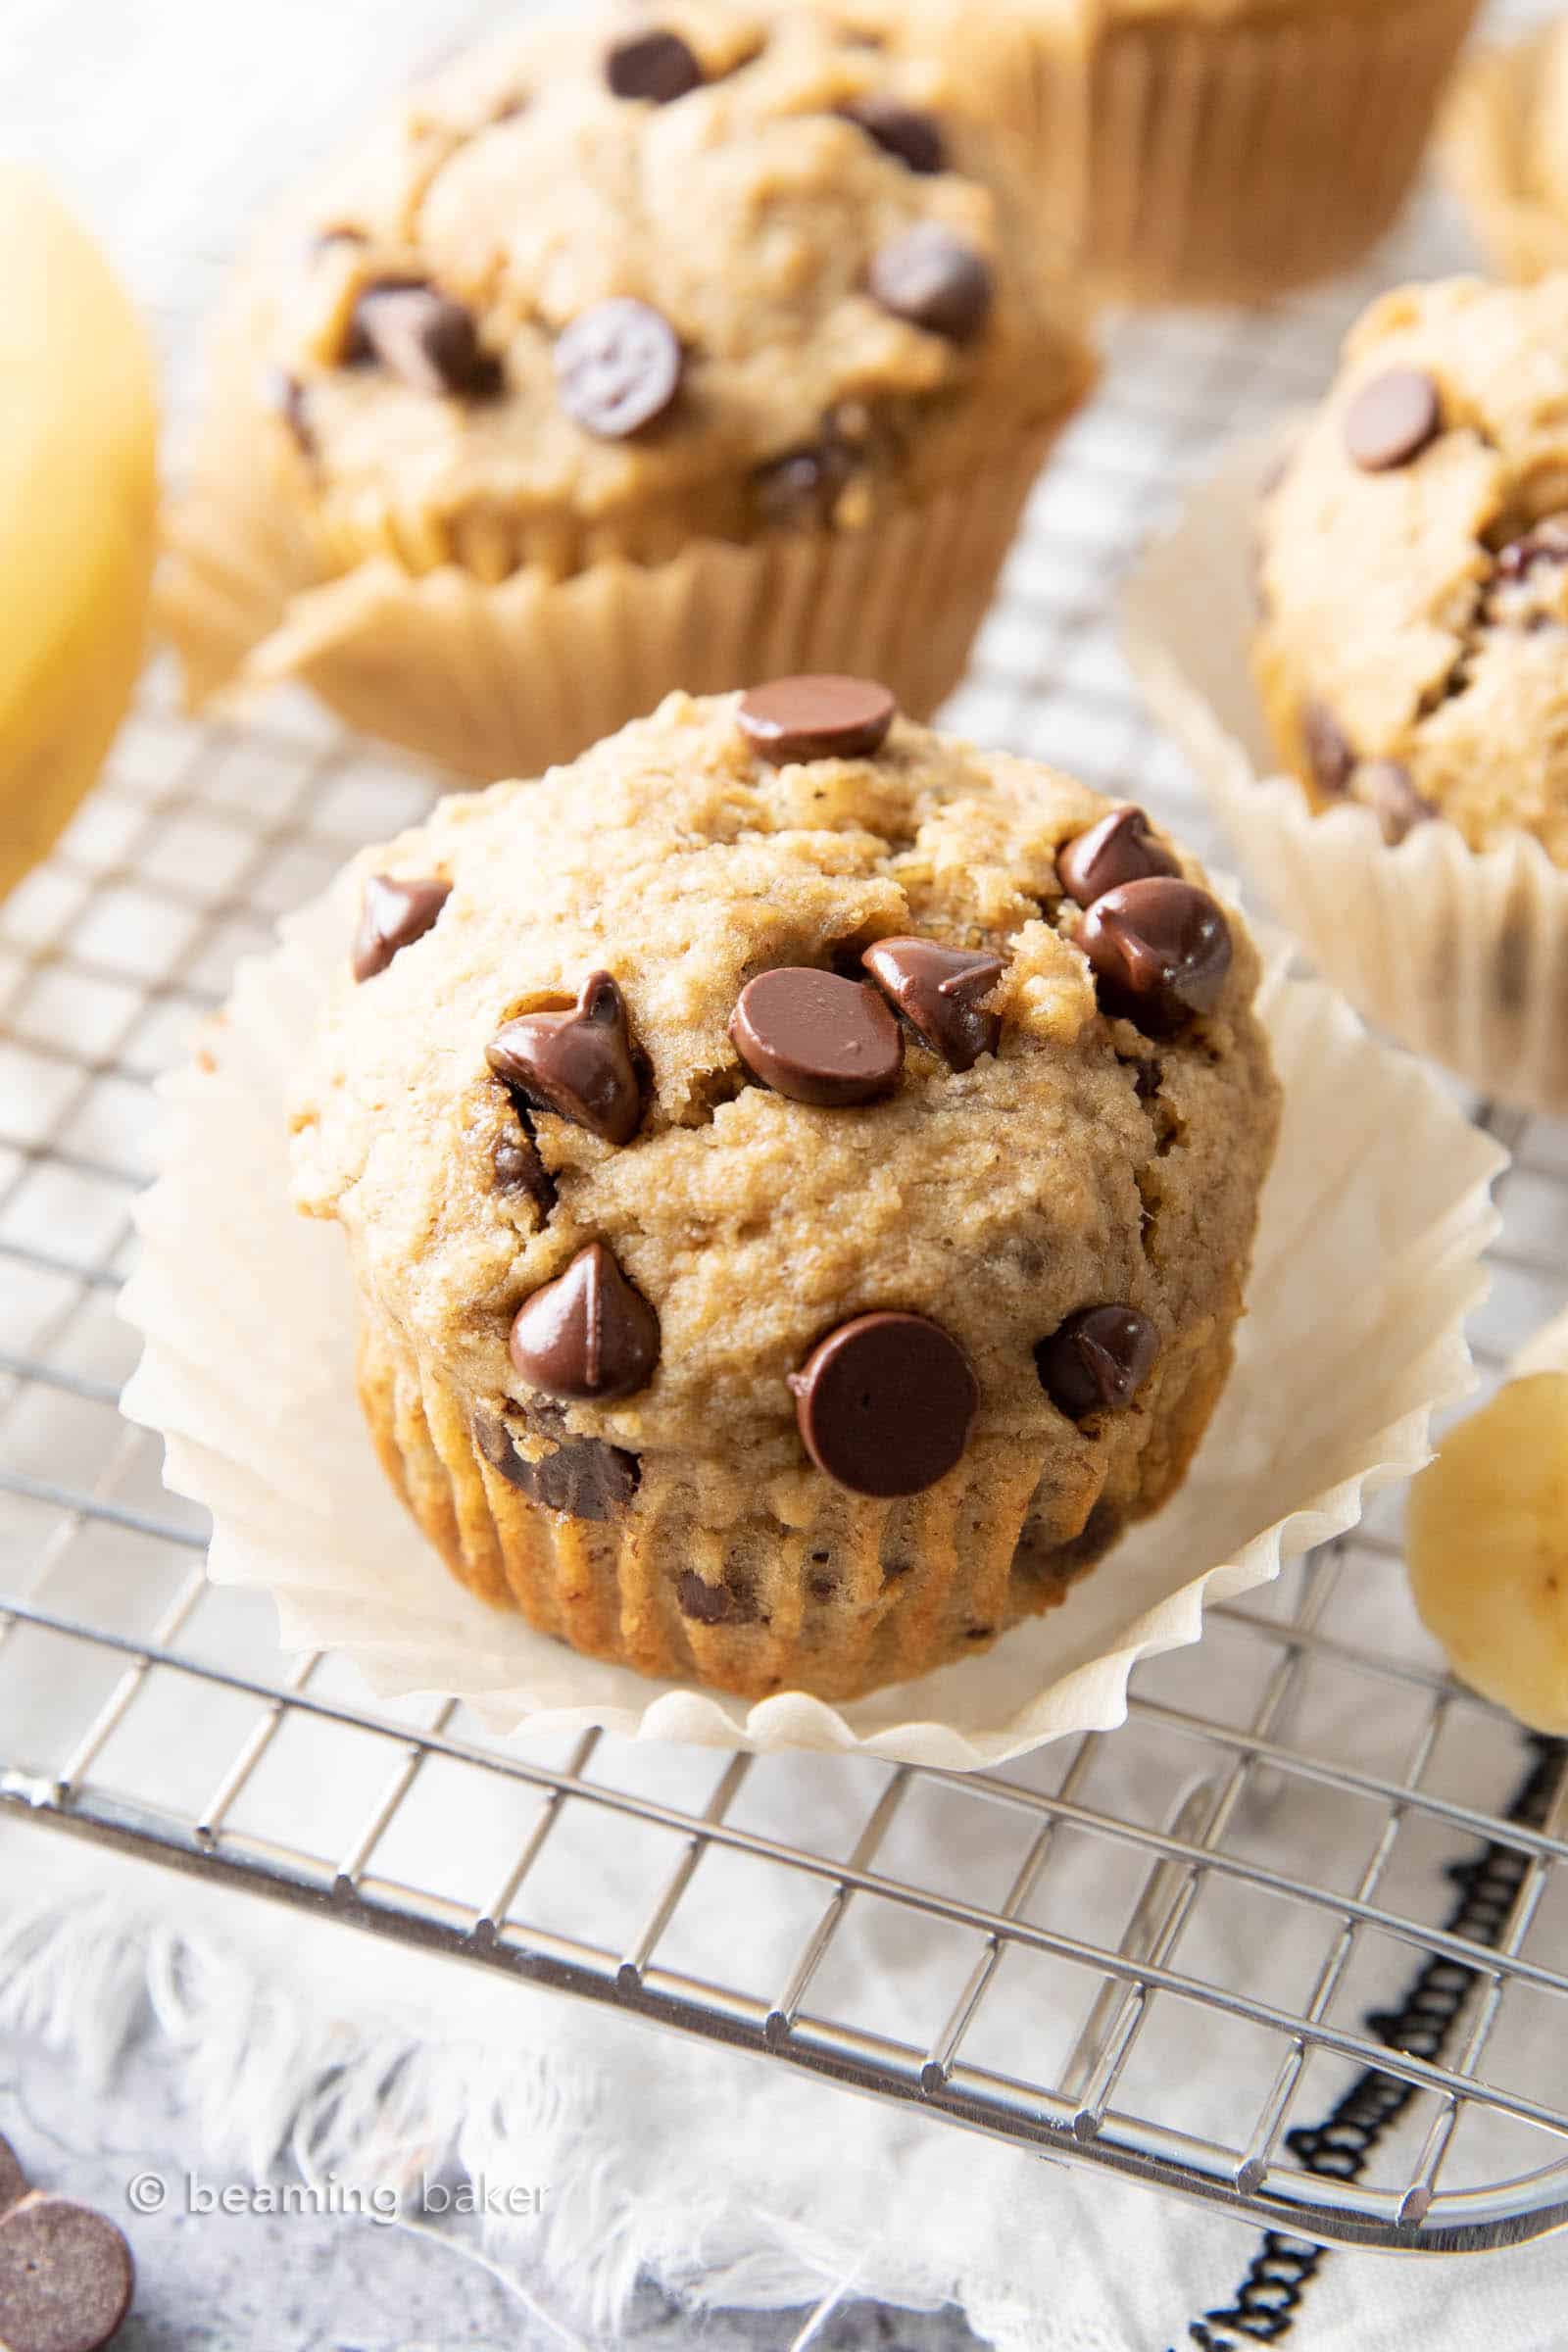 Easy Healthy Muffin Recipes (V, GF): the best healthy muffin recipes, including healthy blueberry muffins, healthy banana muffins, healthy pumpkin muffins and more! Healthy, Vegan, Gluten Free. #Muffins #Healthy #HealthyBreakfast #Vegan #GlutenFree | Recipes at BeamingBaker.com